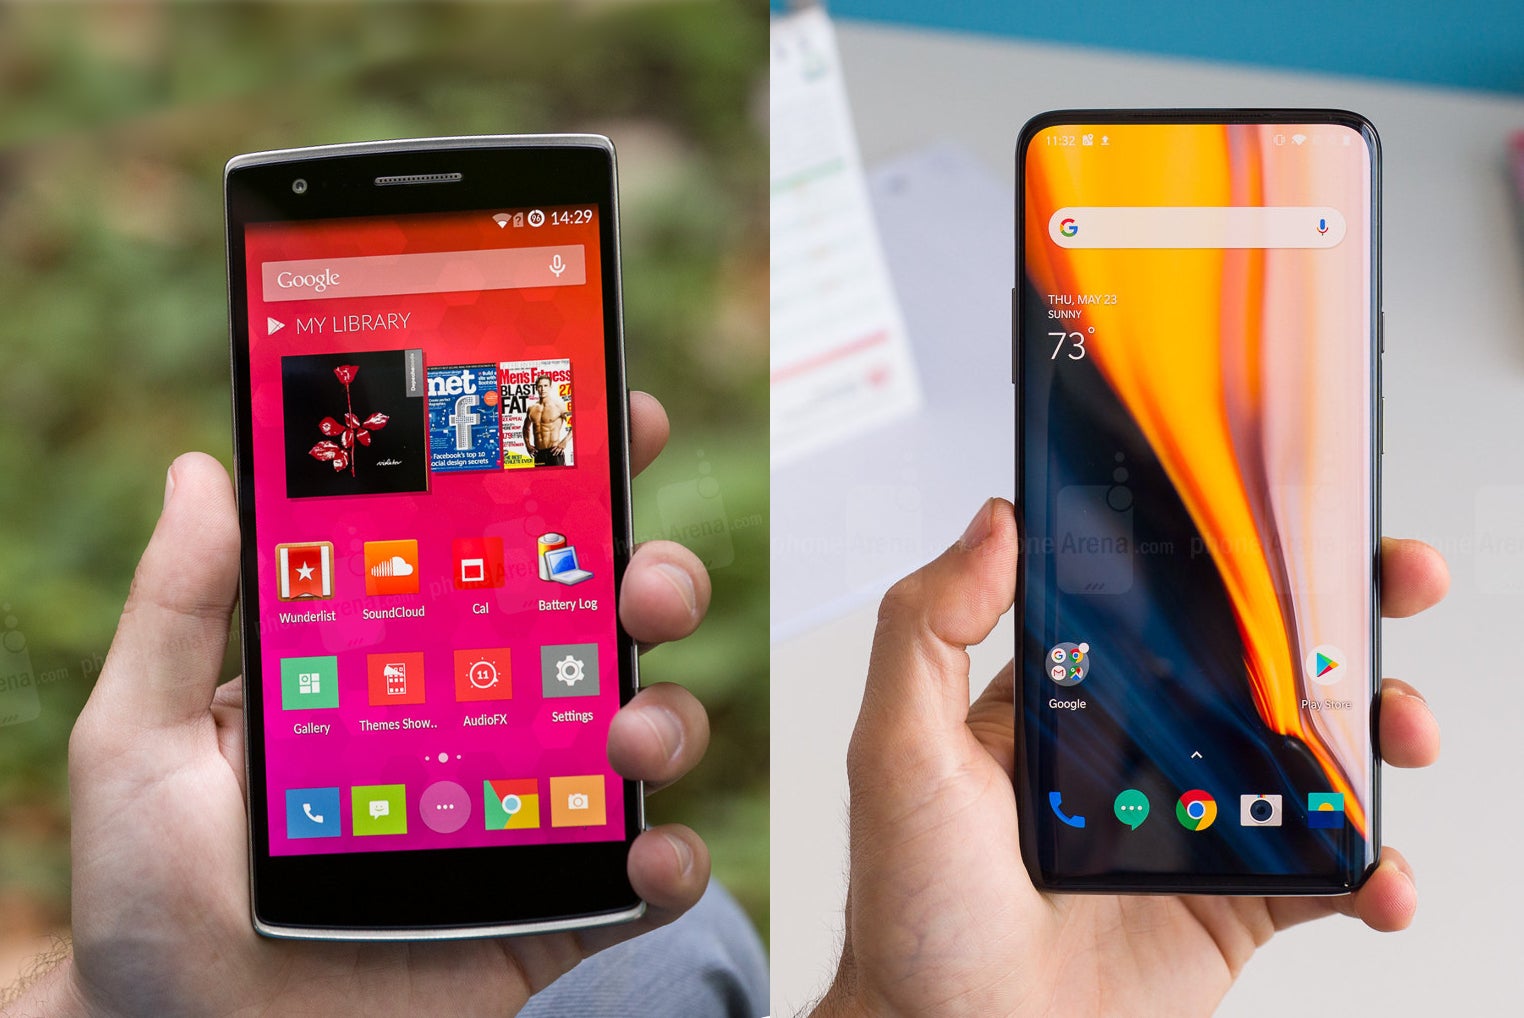 OnePlus One and OnePlus 7 Pro, 5 years apart - LG should learn a thing or two from OnePlus' success